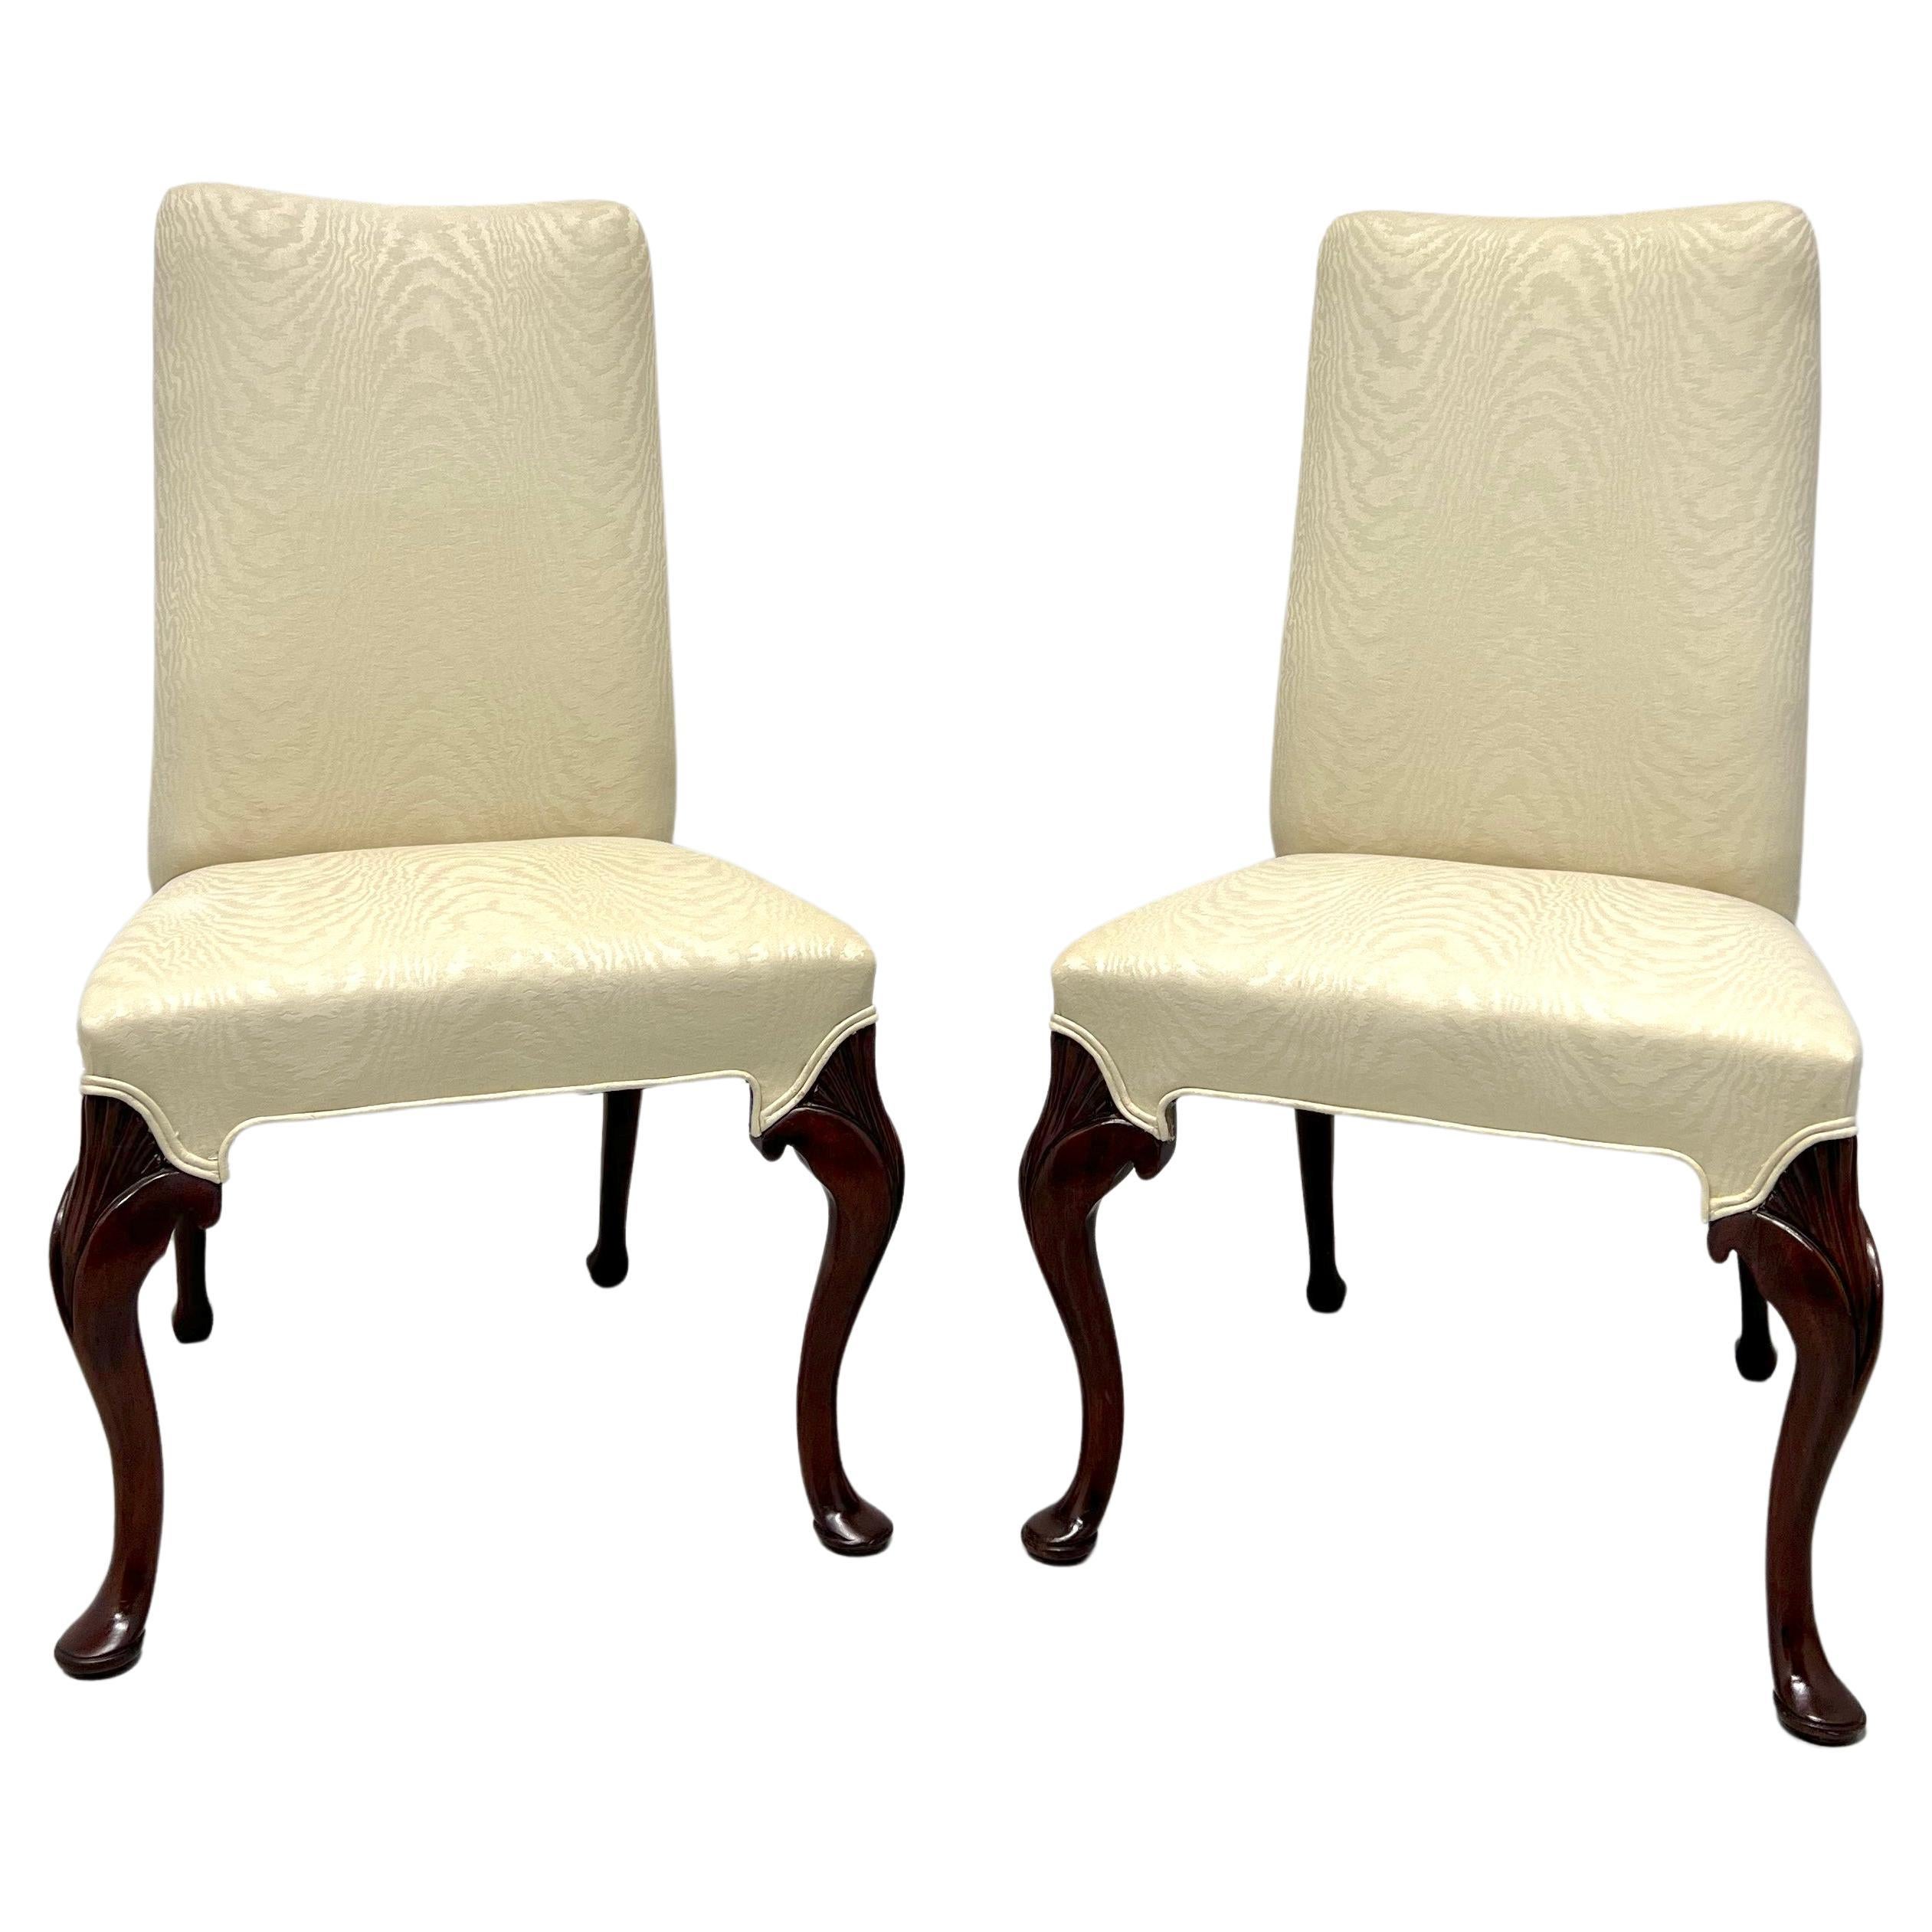 Late 20th Century Mahogany Frame French Provincial Parsons Chairs - Pair For Sale